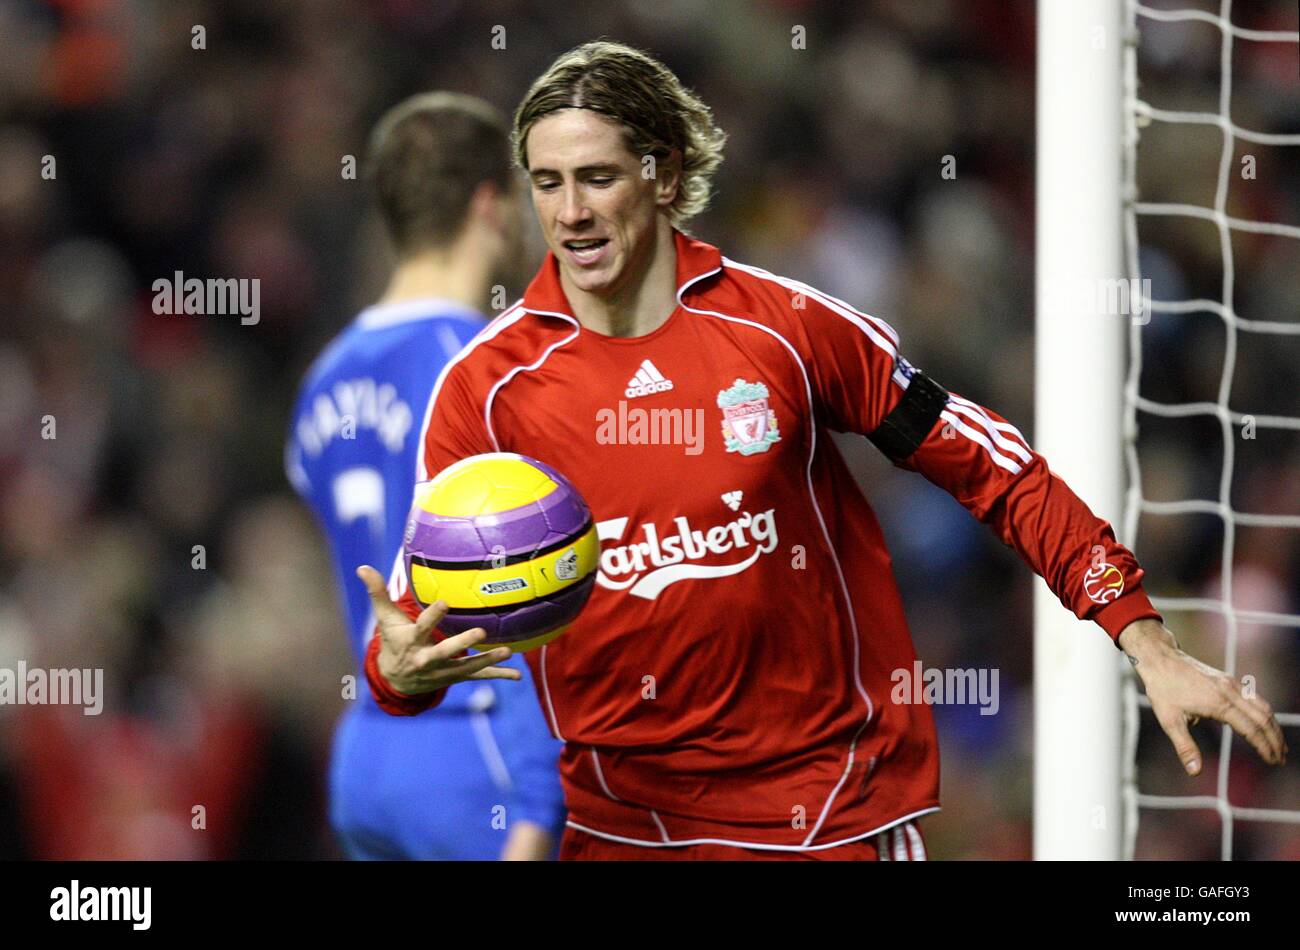 Soccer - Barclays Premier League - Liverpool v Wigan Athletic - Anfield. Liverpool's Fernando Torres grabs the ball in celebration after scoring the first goal of the game. Stock Photo